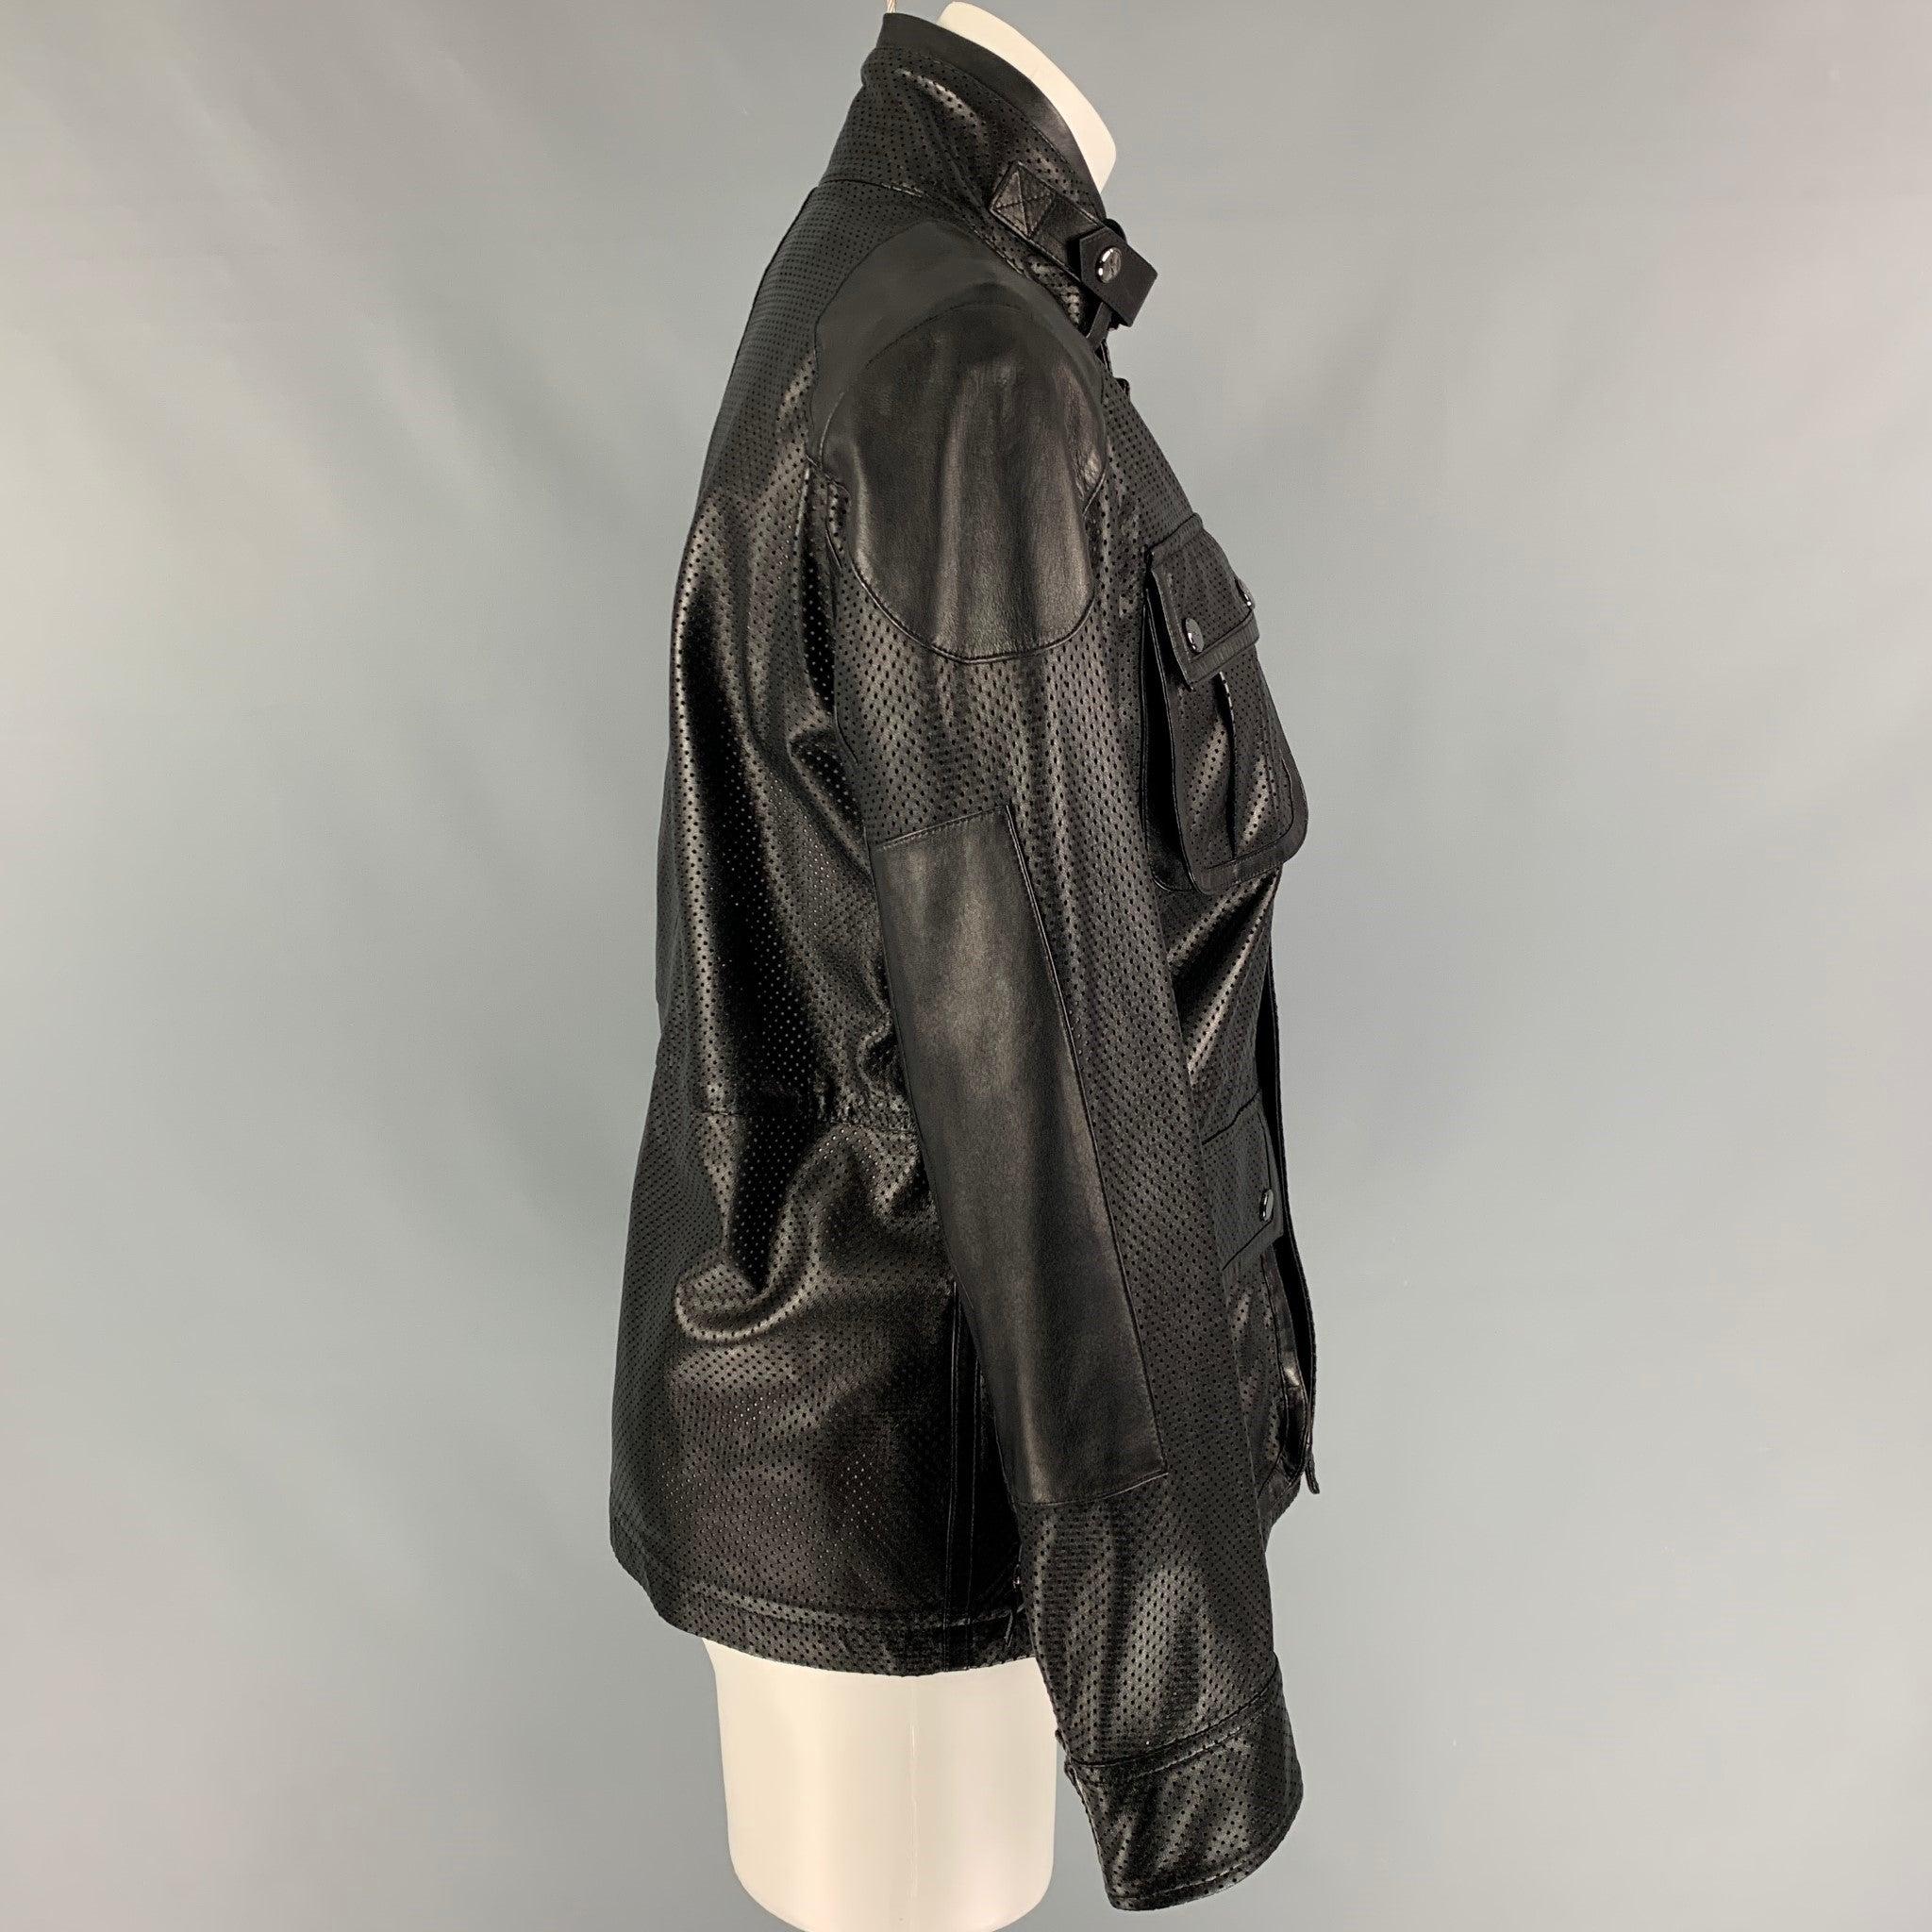 RALPH LAUREN 'Black Label' jacket comes in a black perforated lamb skin leather featuring patch pockets, silver tone hardware, collar strap, and a zip & snap button closure. Made in Italy.
Very Good
Pre-Owned Condition. 

Marked:   2 

Measurements: